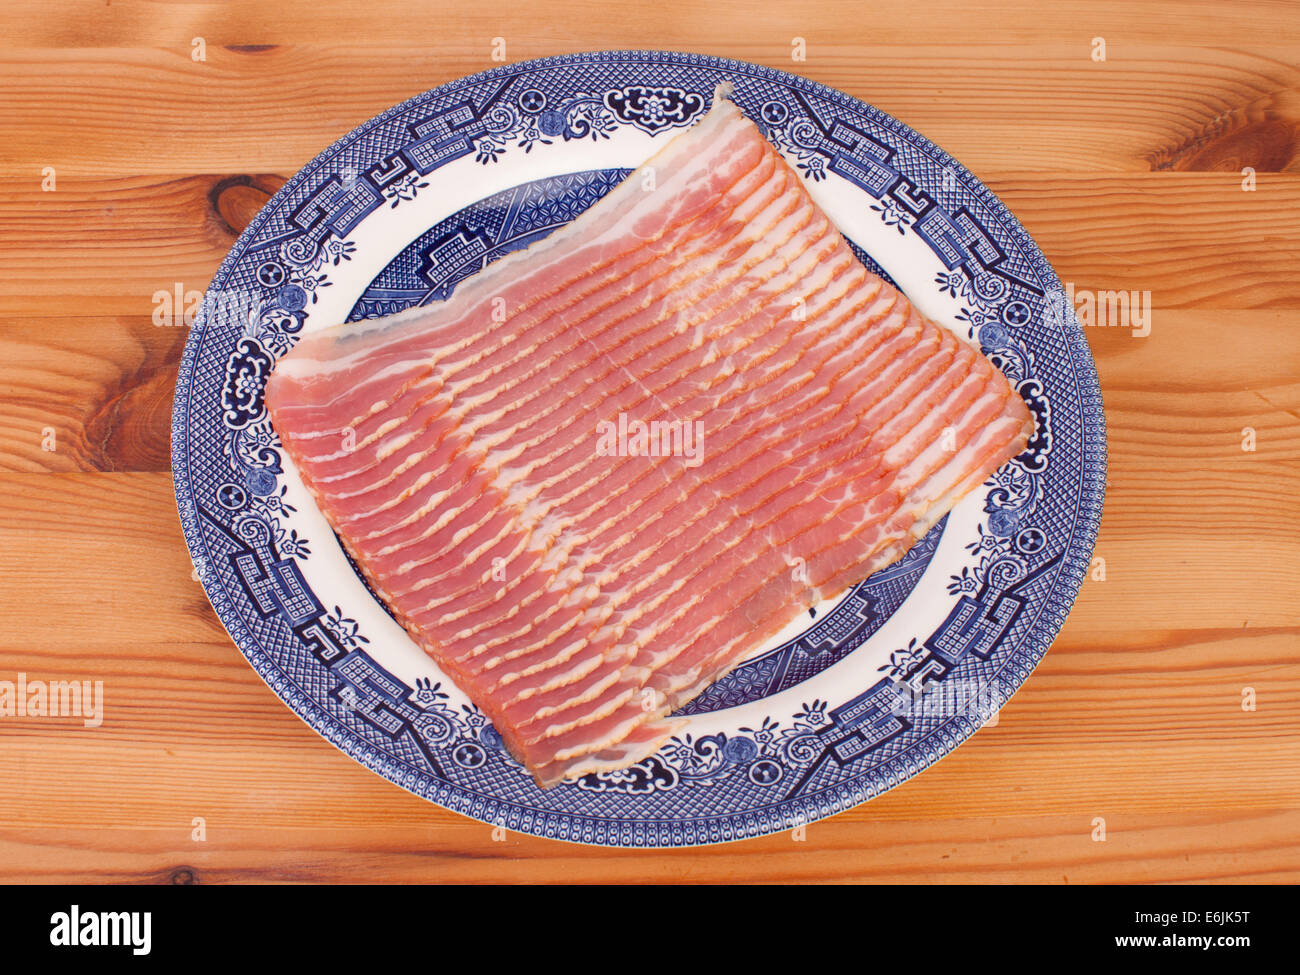 streaky bacon in the blue plate on wooden table Stock Photo